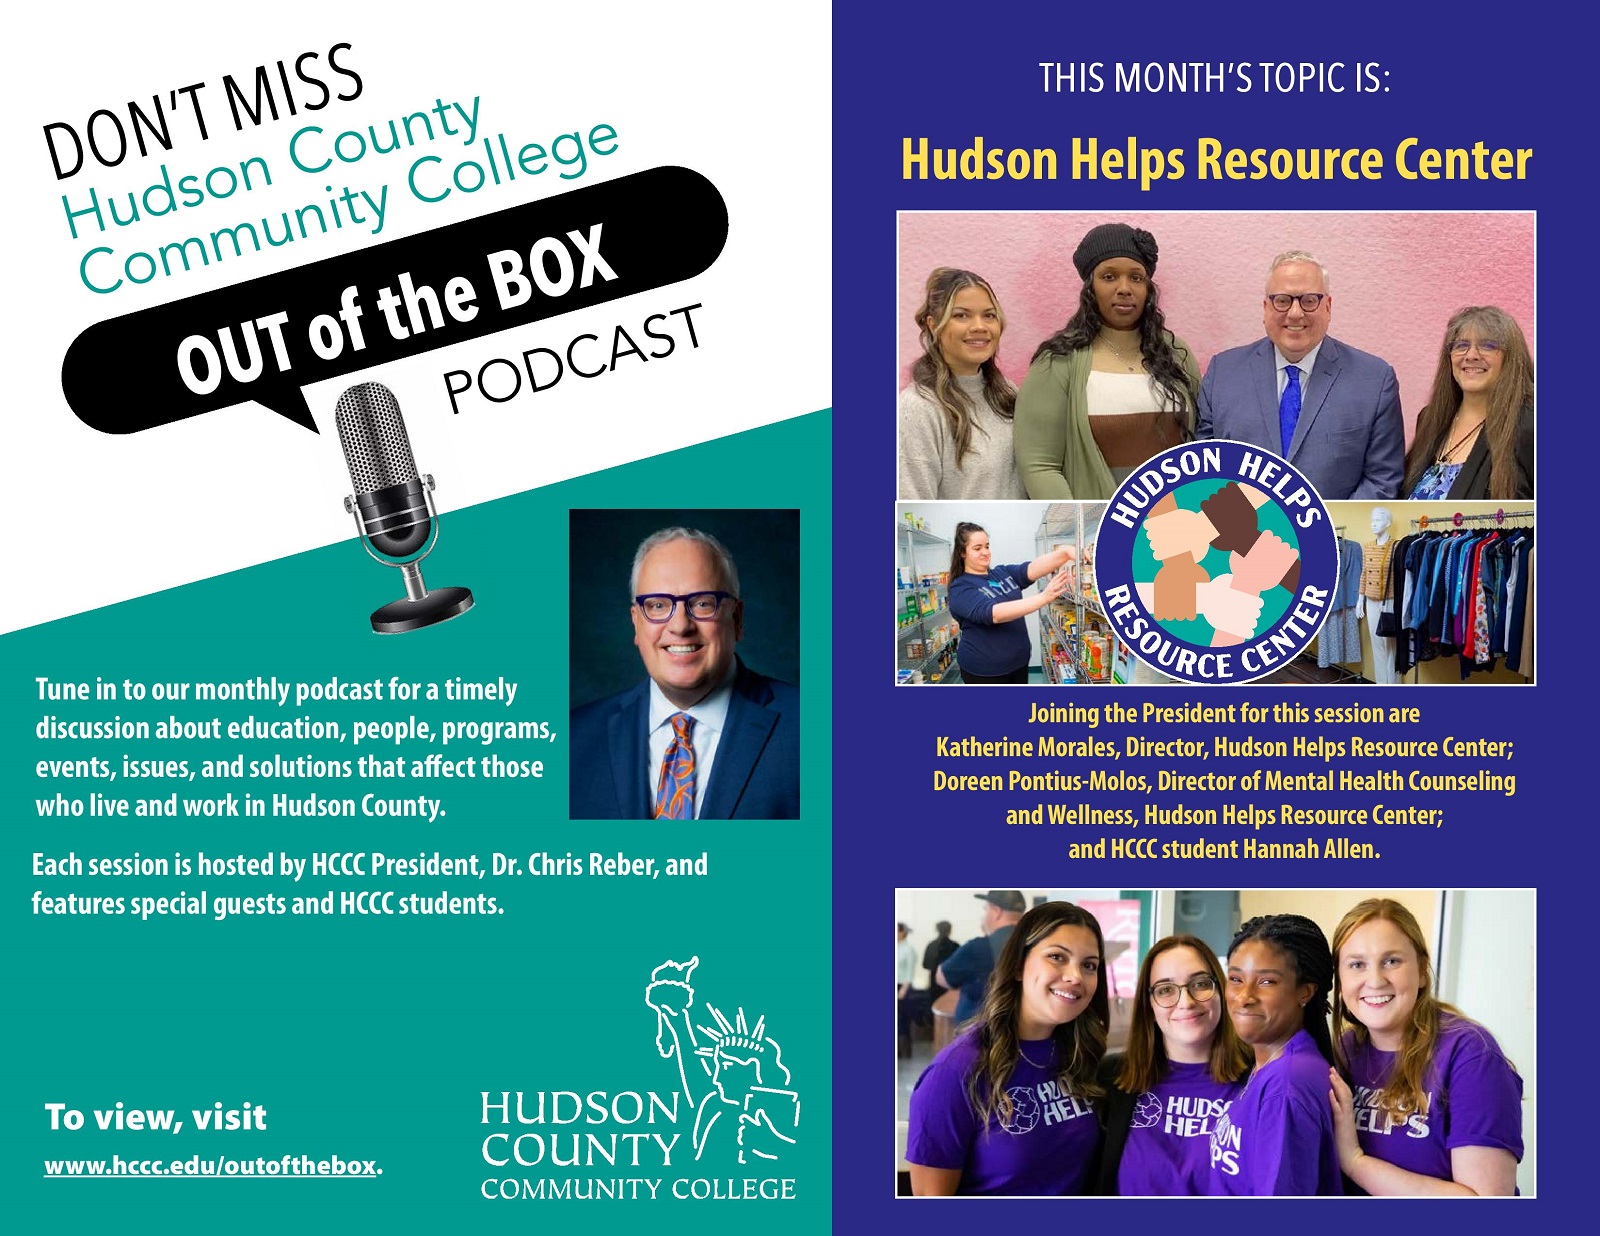 HCCC Out of the Box - Hudson Helps Resource Center